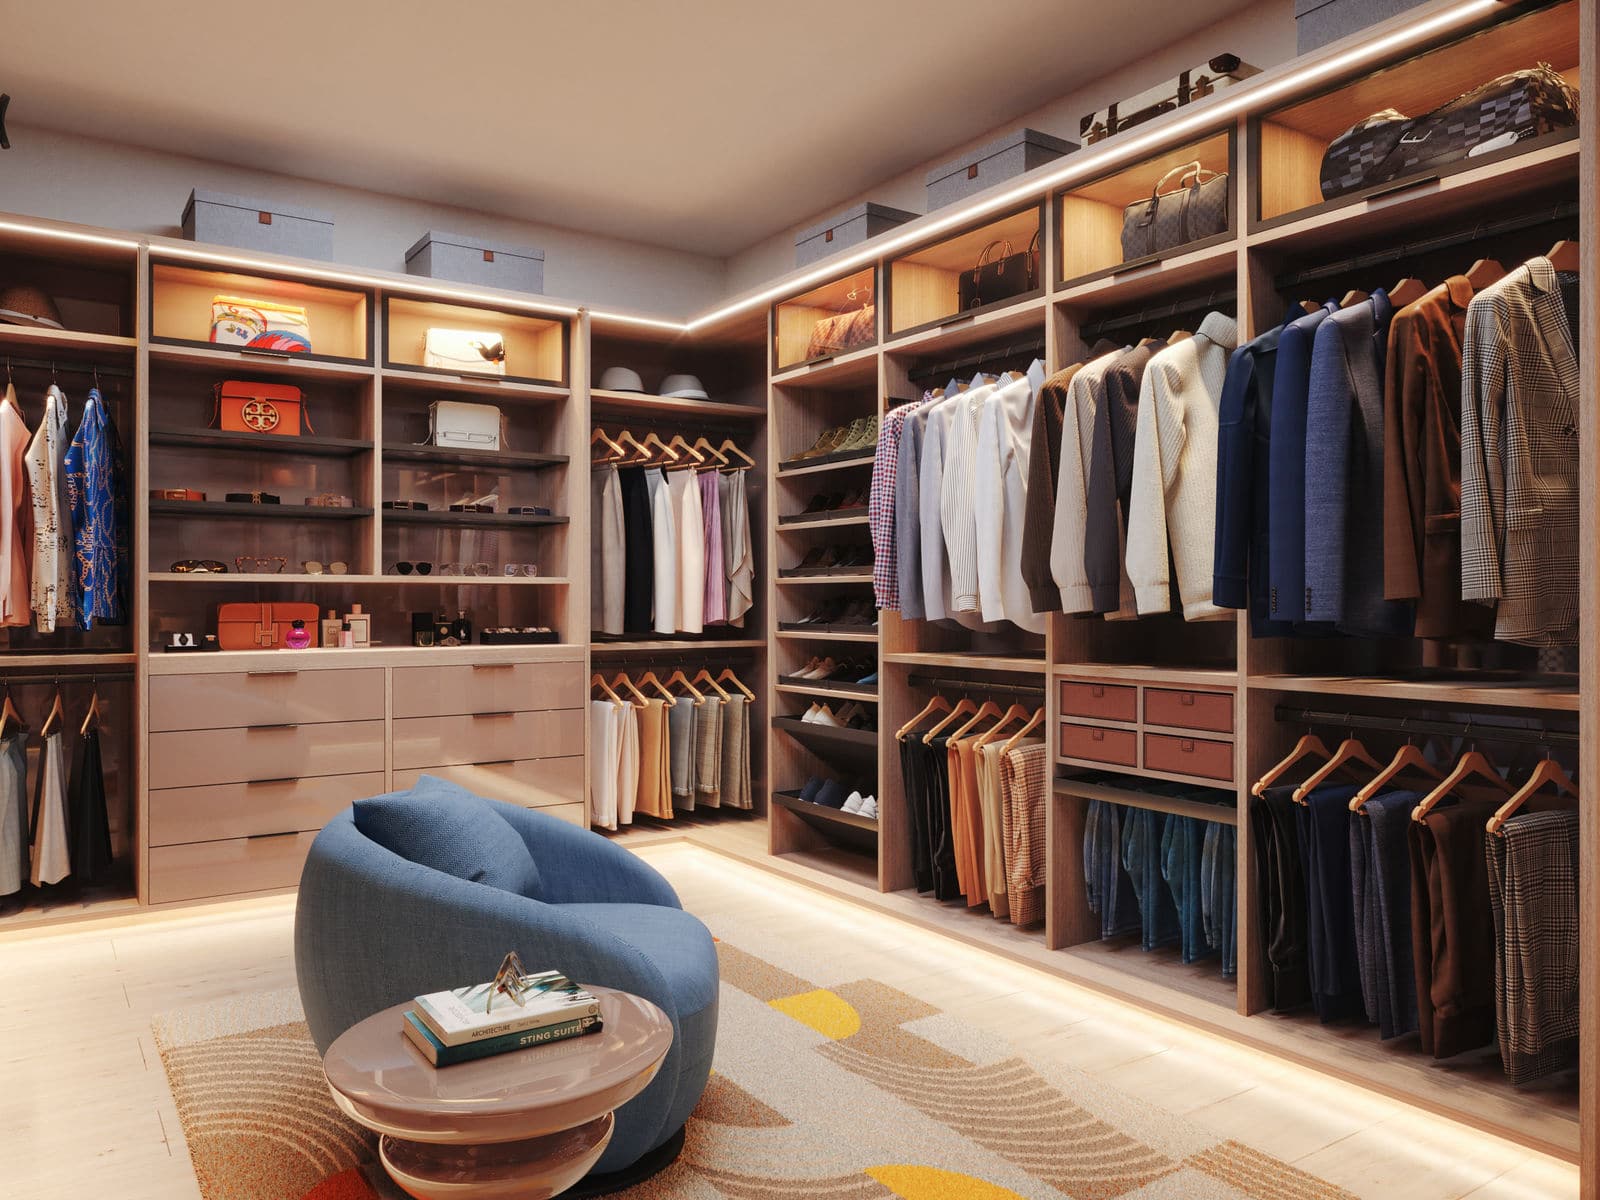 Closet Dangers: 4 Things You Should be Aware Of